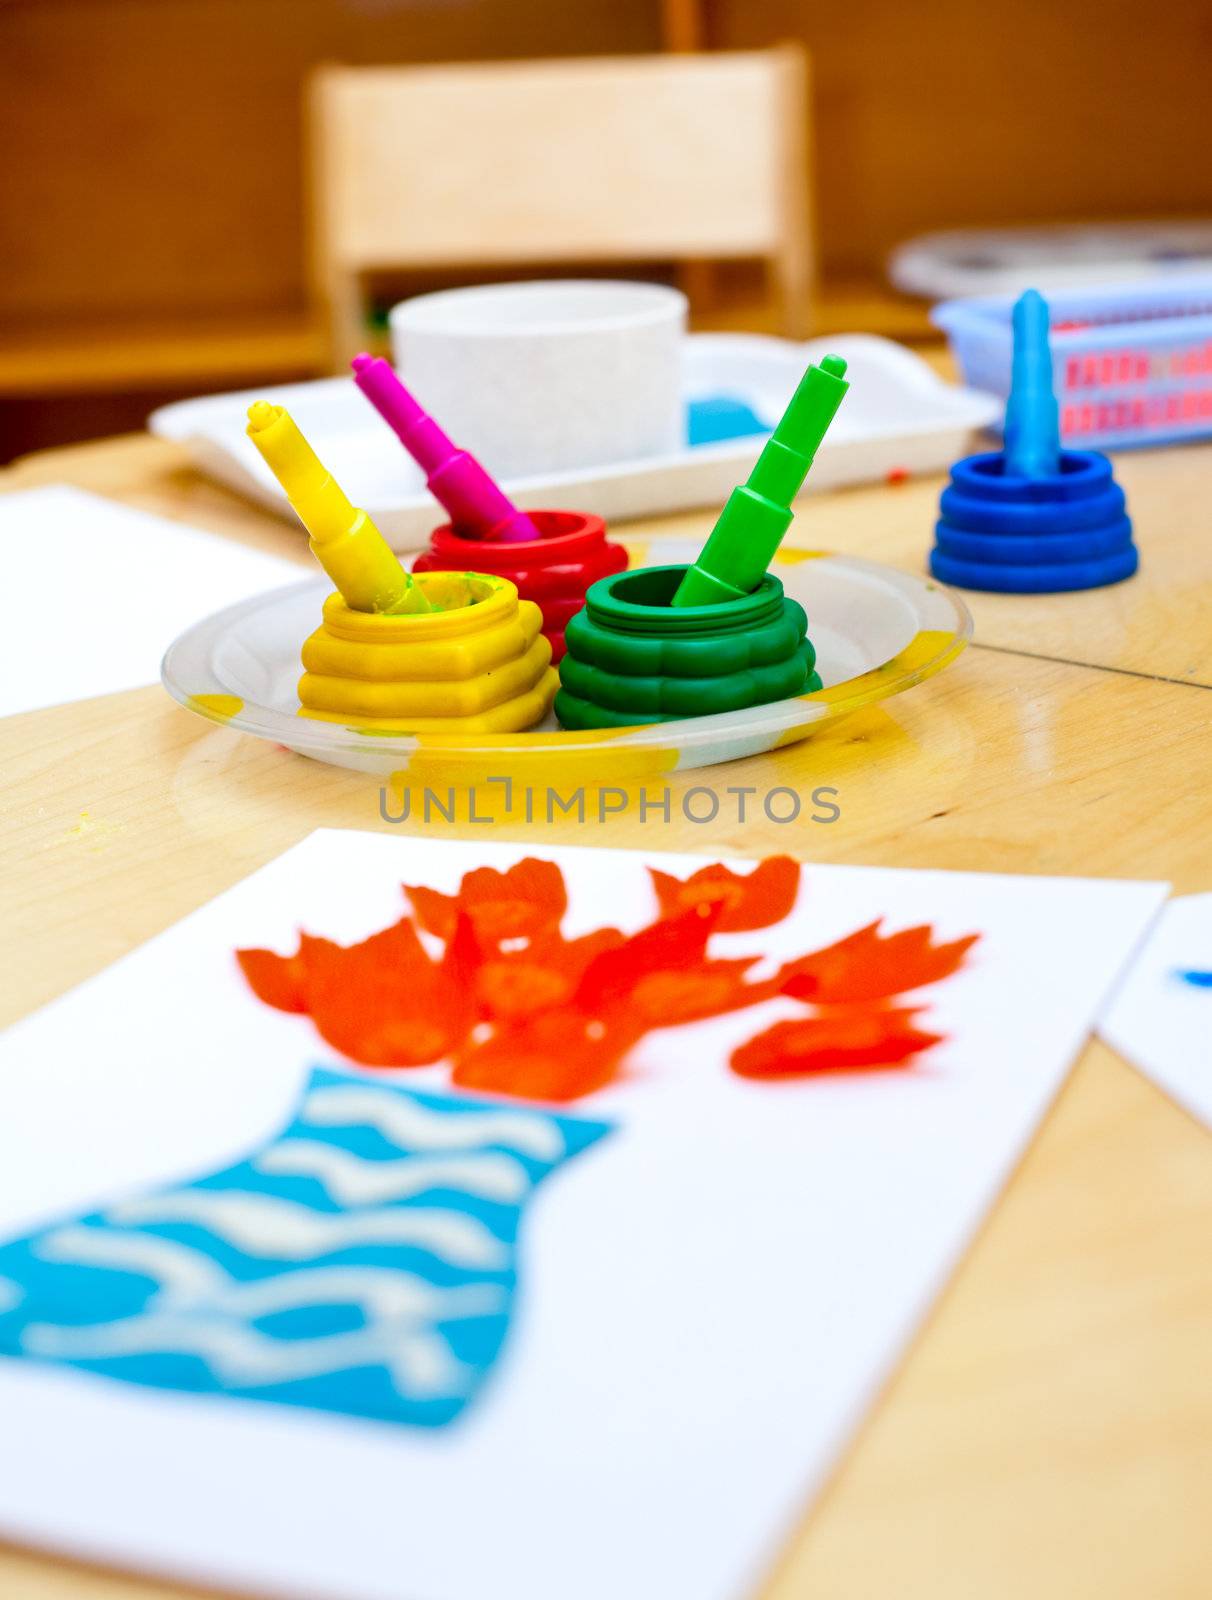 Children's art items on a table